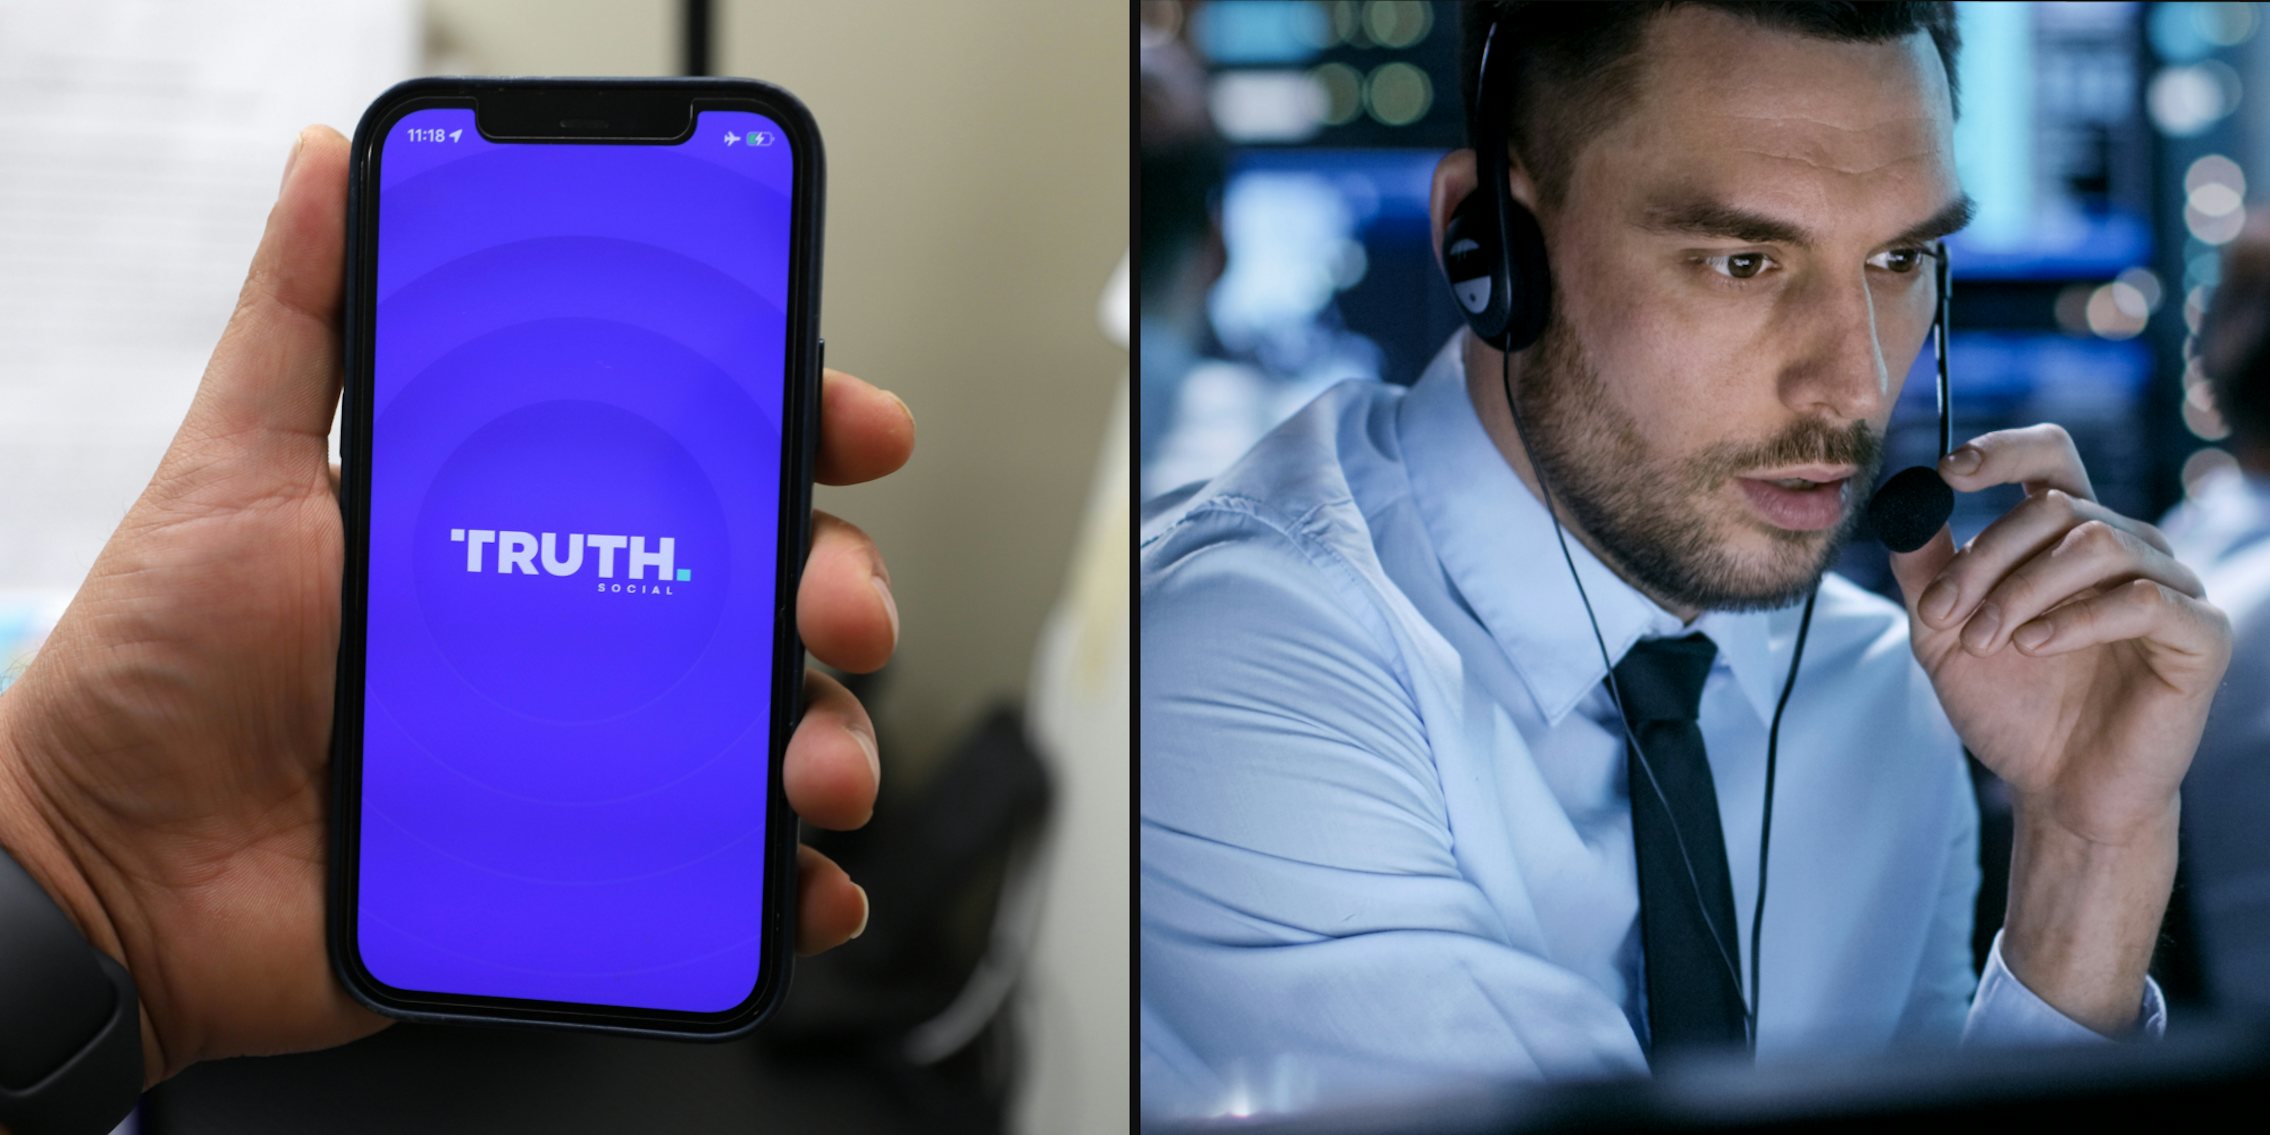 Truth social logo on phone in man's hand (l) Government system control technical worker with headset (r)